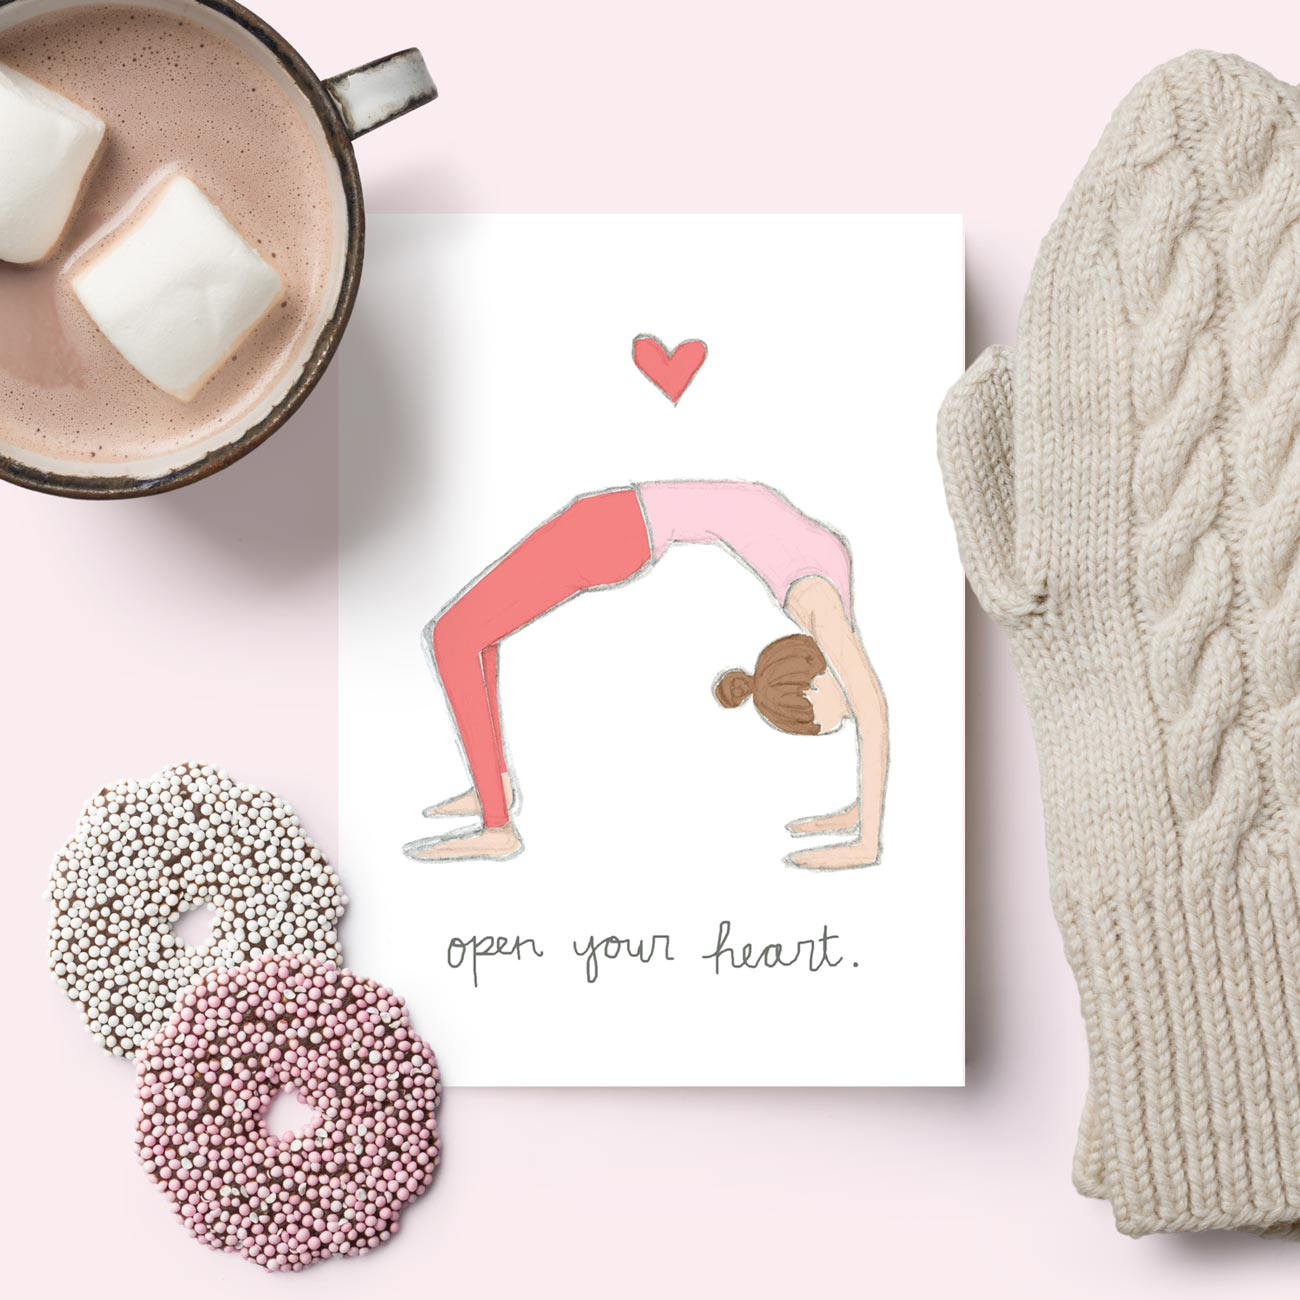 Open up your Heart - Yoga - Sticker